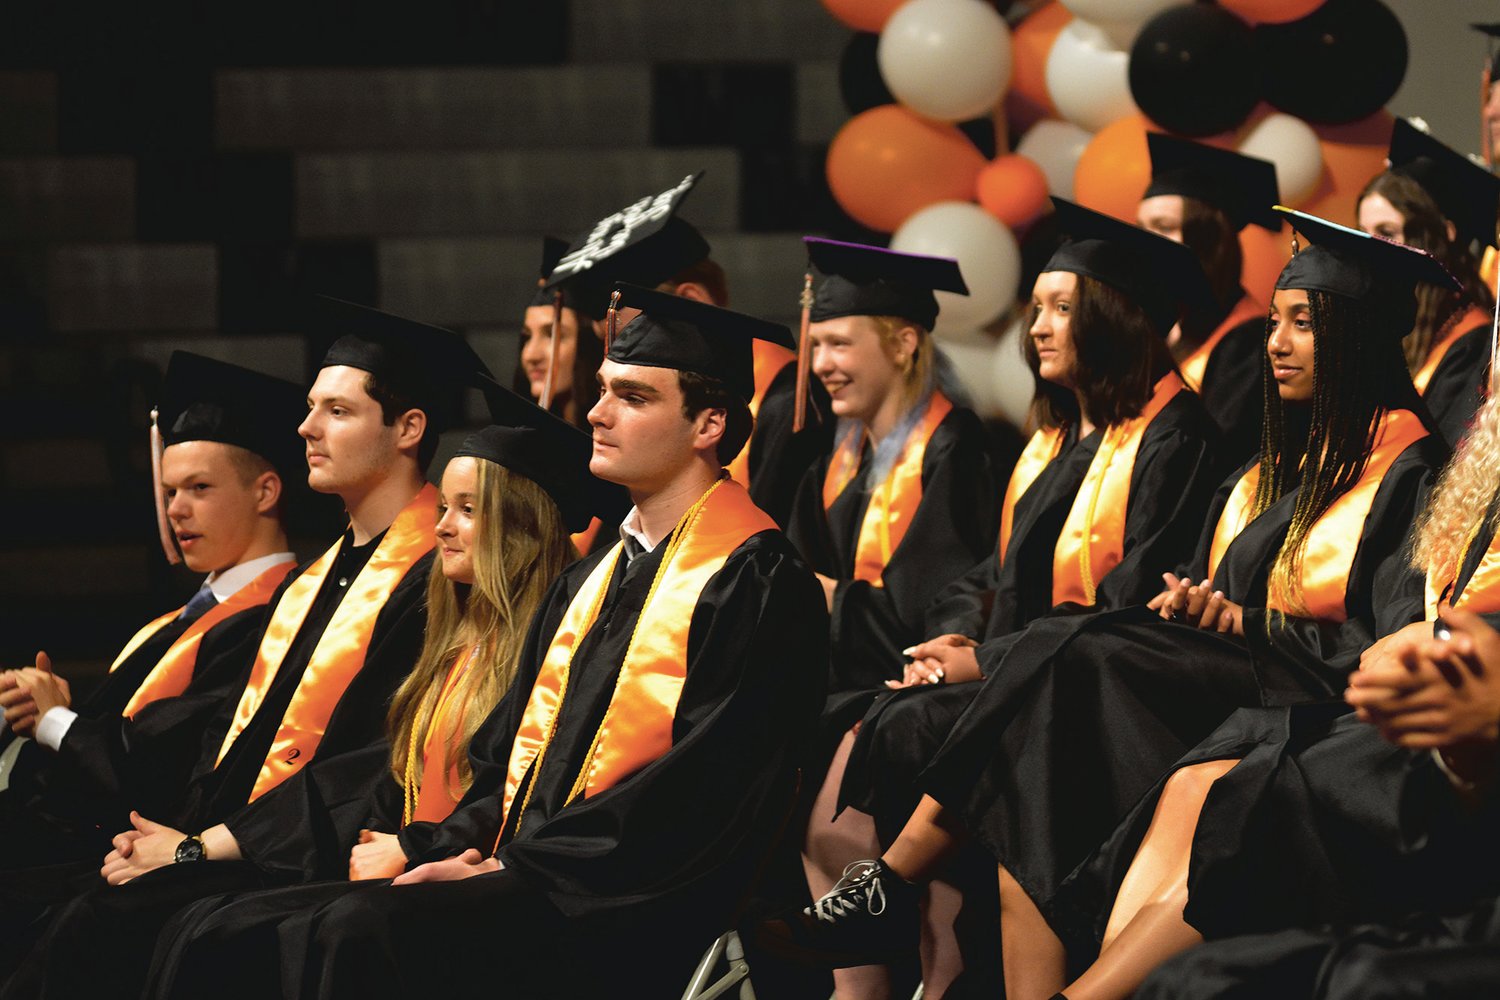 Members of Rainier’s 2022 graduating class watch on as a video plays at the commencement ceremony on June 10.